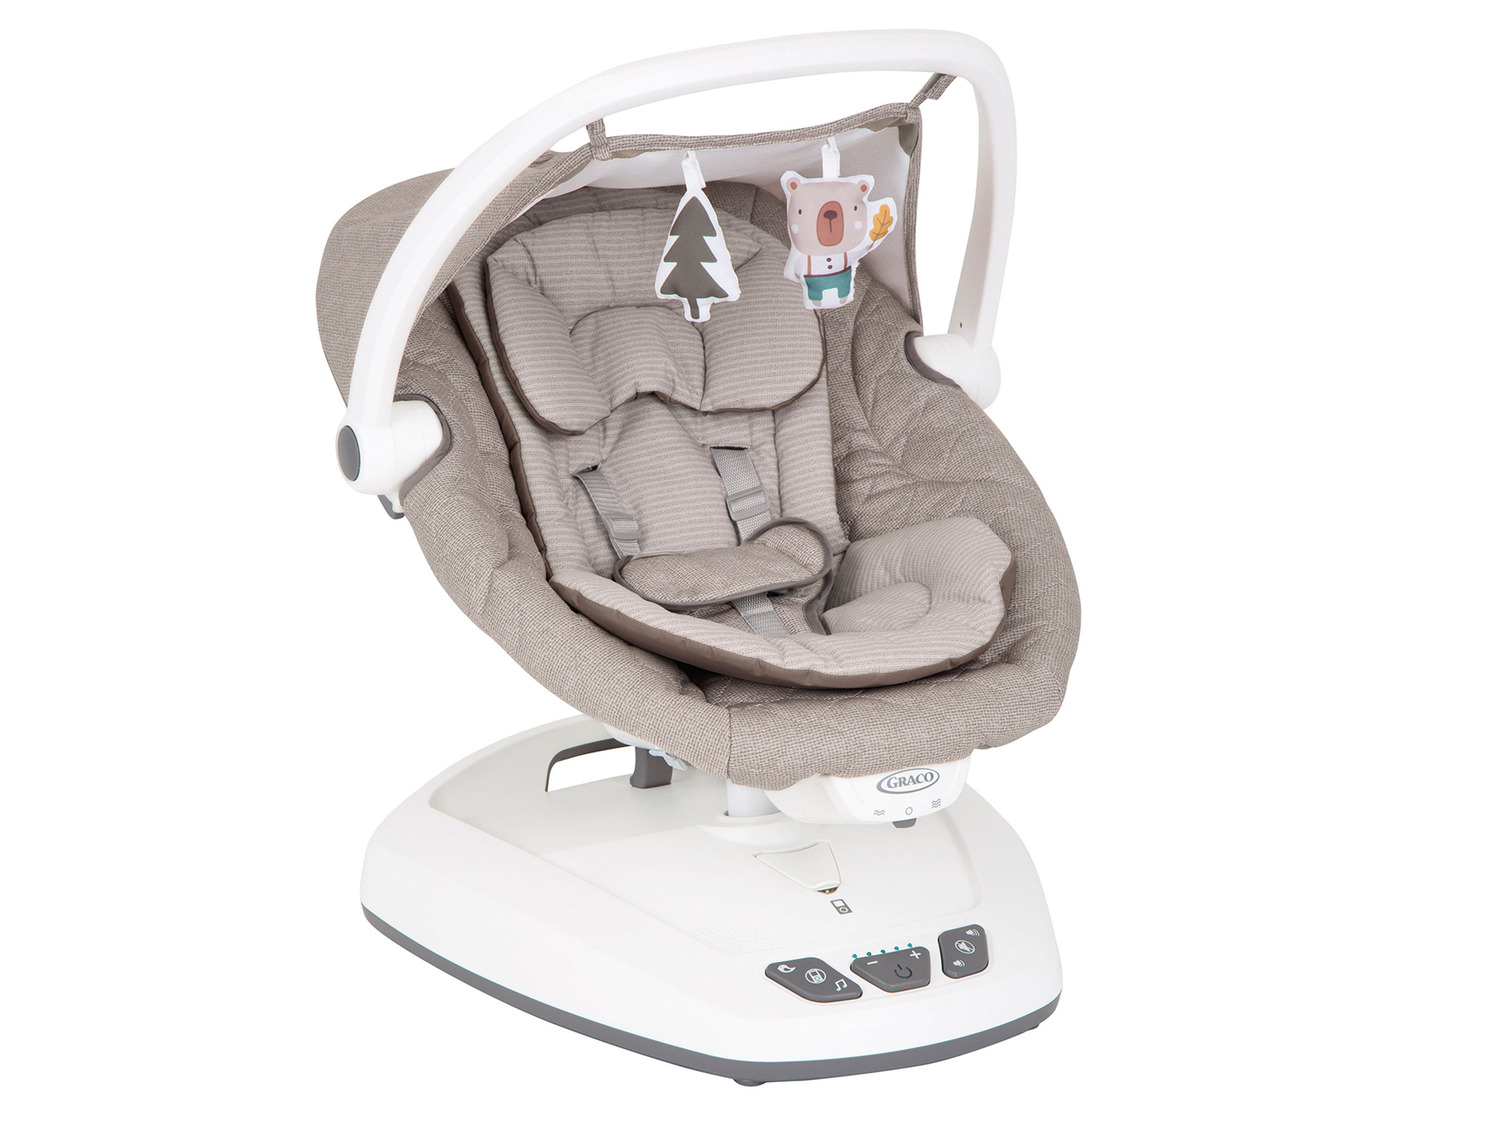 Graco Babyschaukel »Move | Me®«, faltbar with LIDL